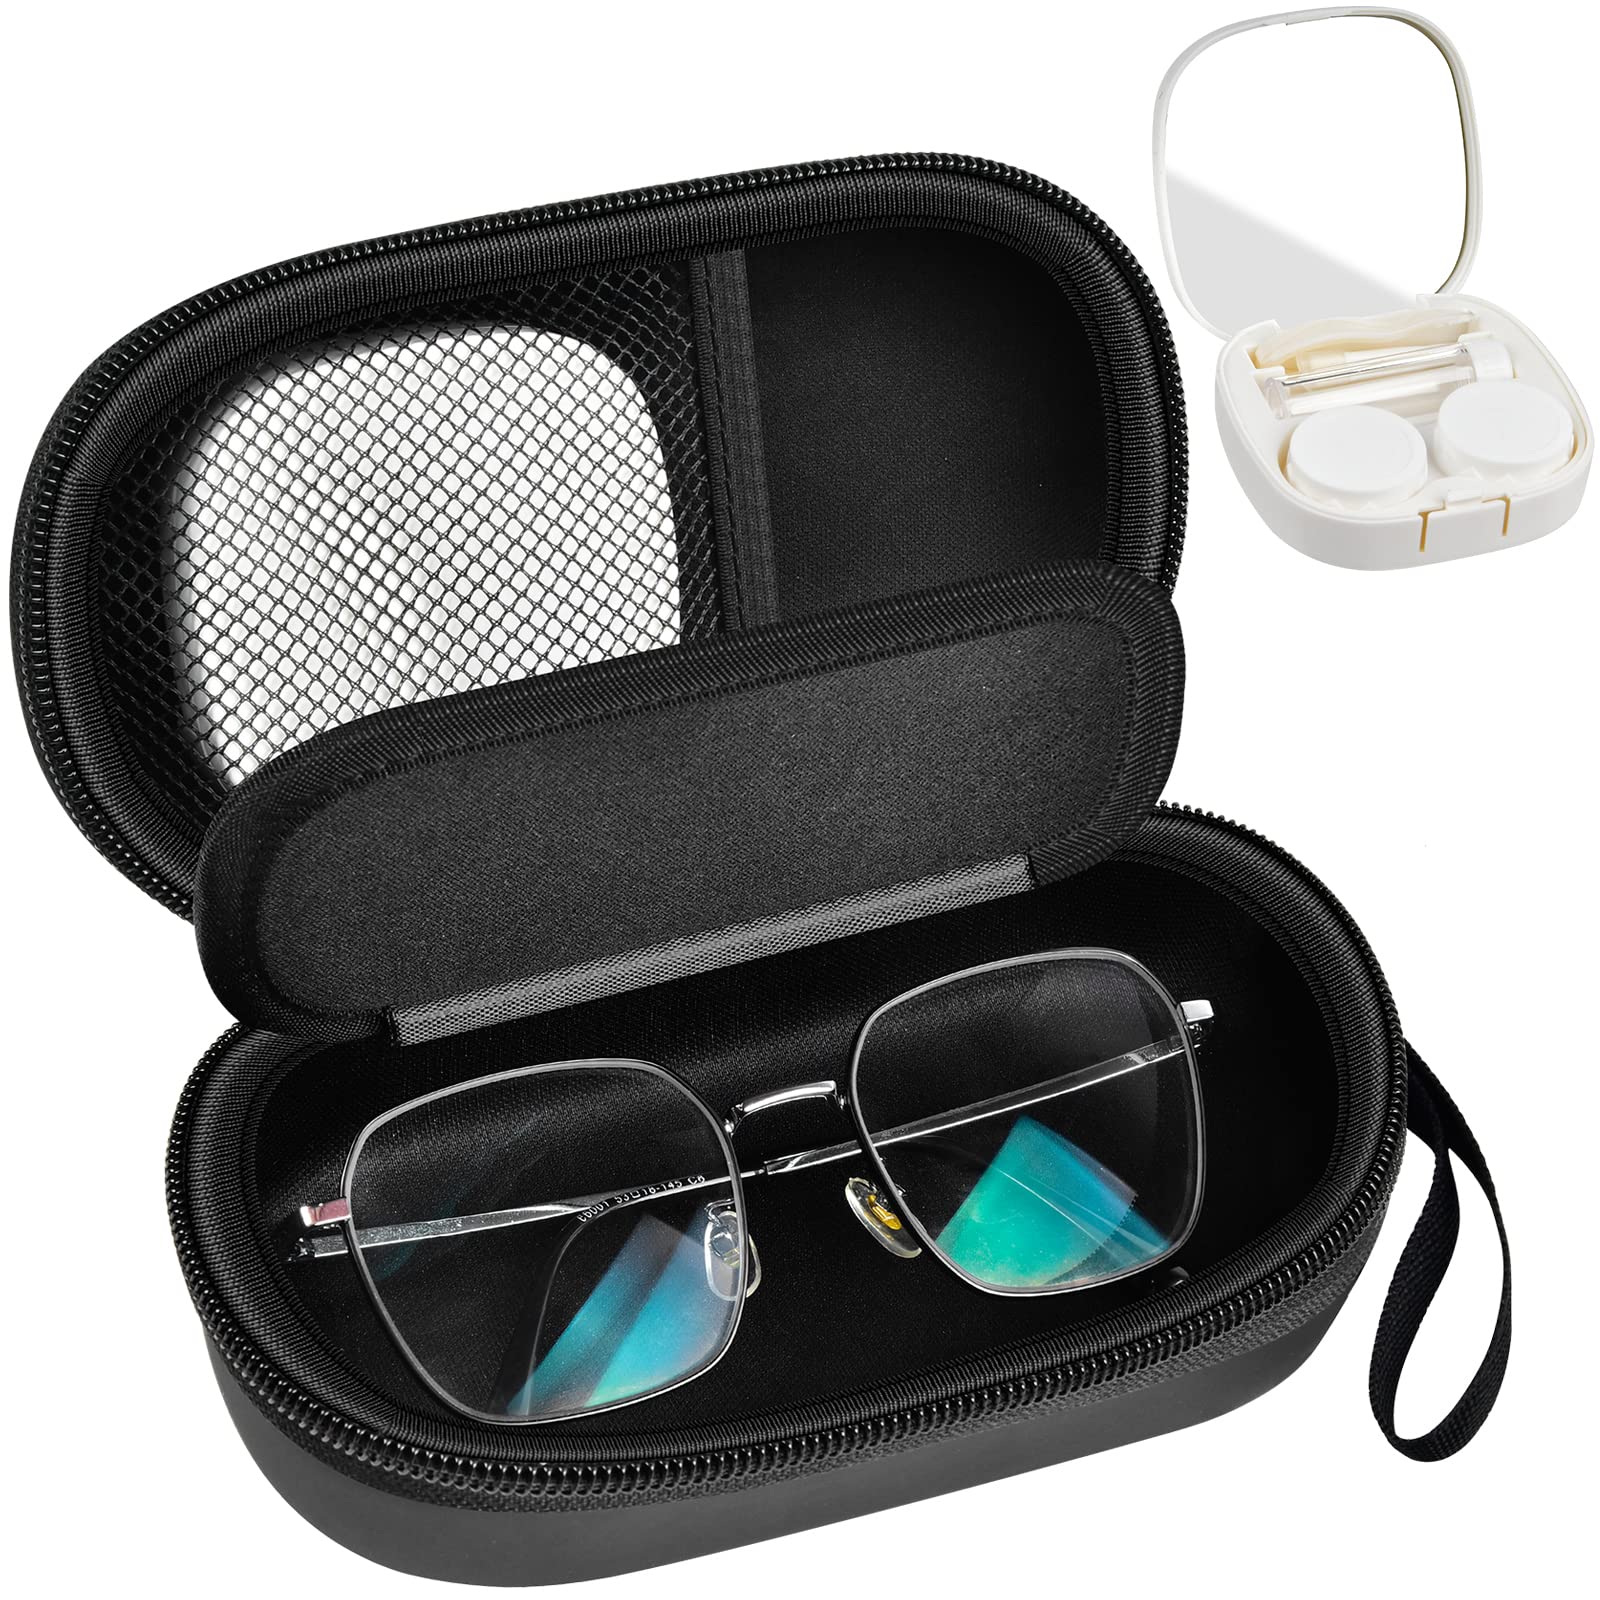 Portable 2 in 1 Contact Lens Case and Glasses Case Traveling Contact Cases  Bag Box Holder with Soak Storage Kit Included Built-in Mirror Tweezer  Contact Lens Solution Bottle and Hand Strap-Black